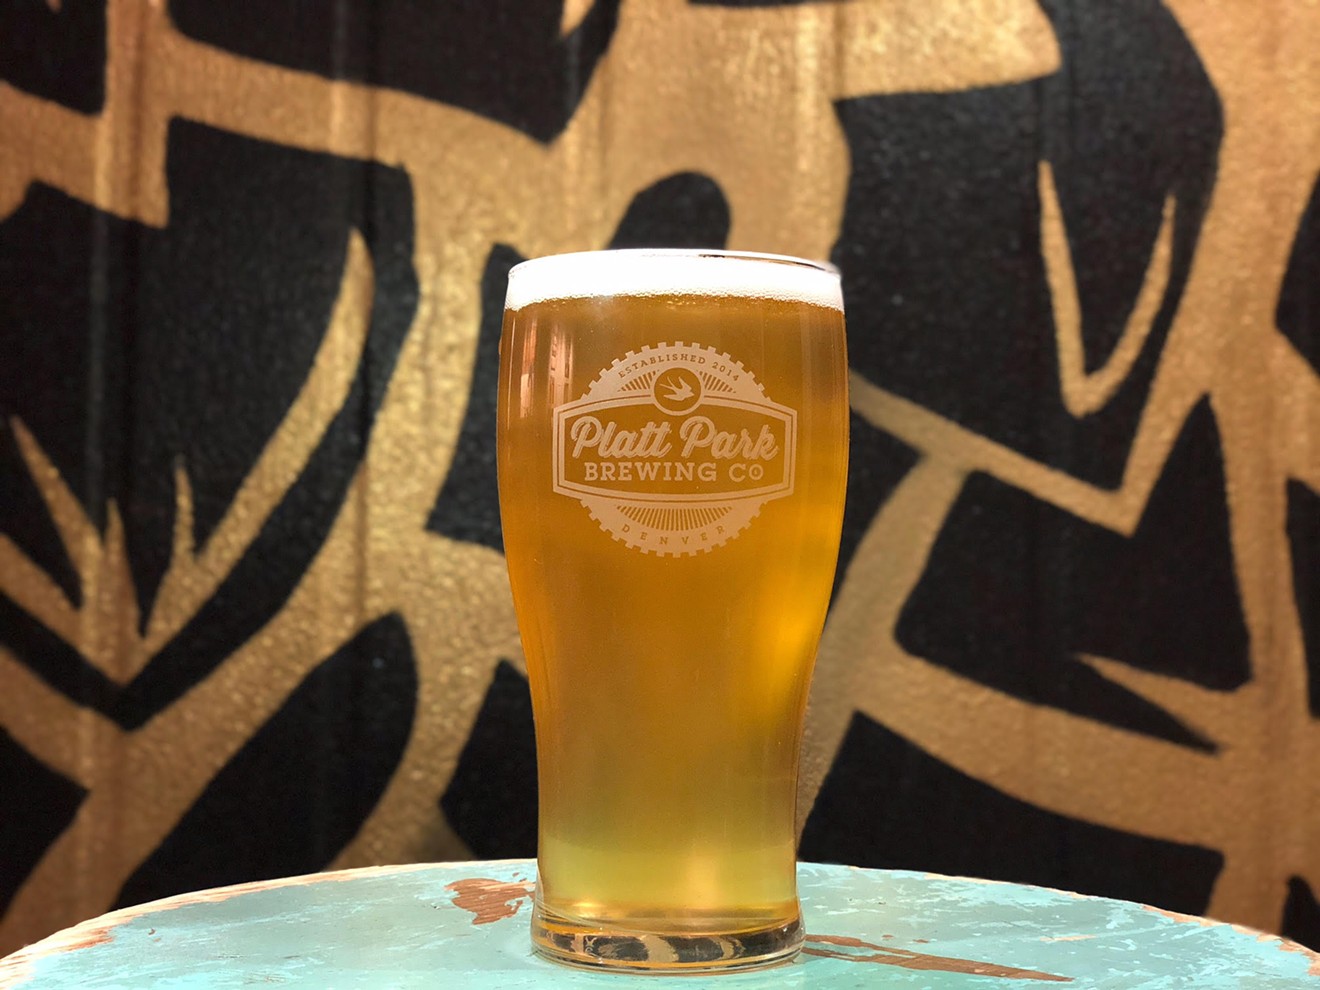 Platt Park is one of three breweries tapping brut IPAs this weekend.